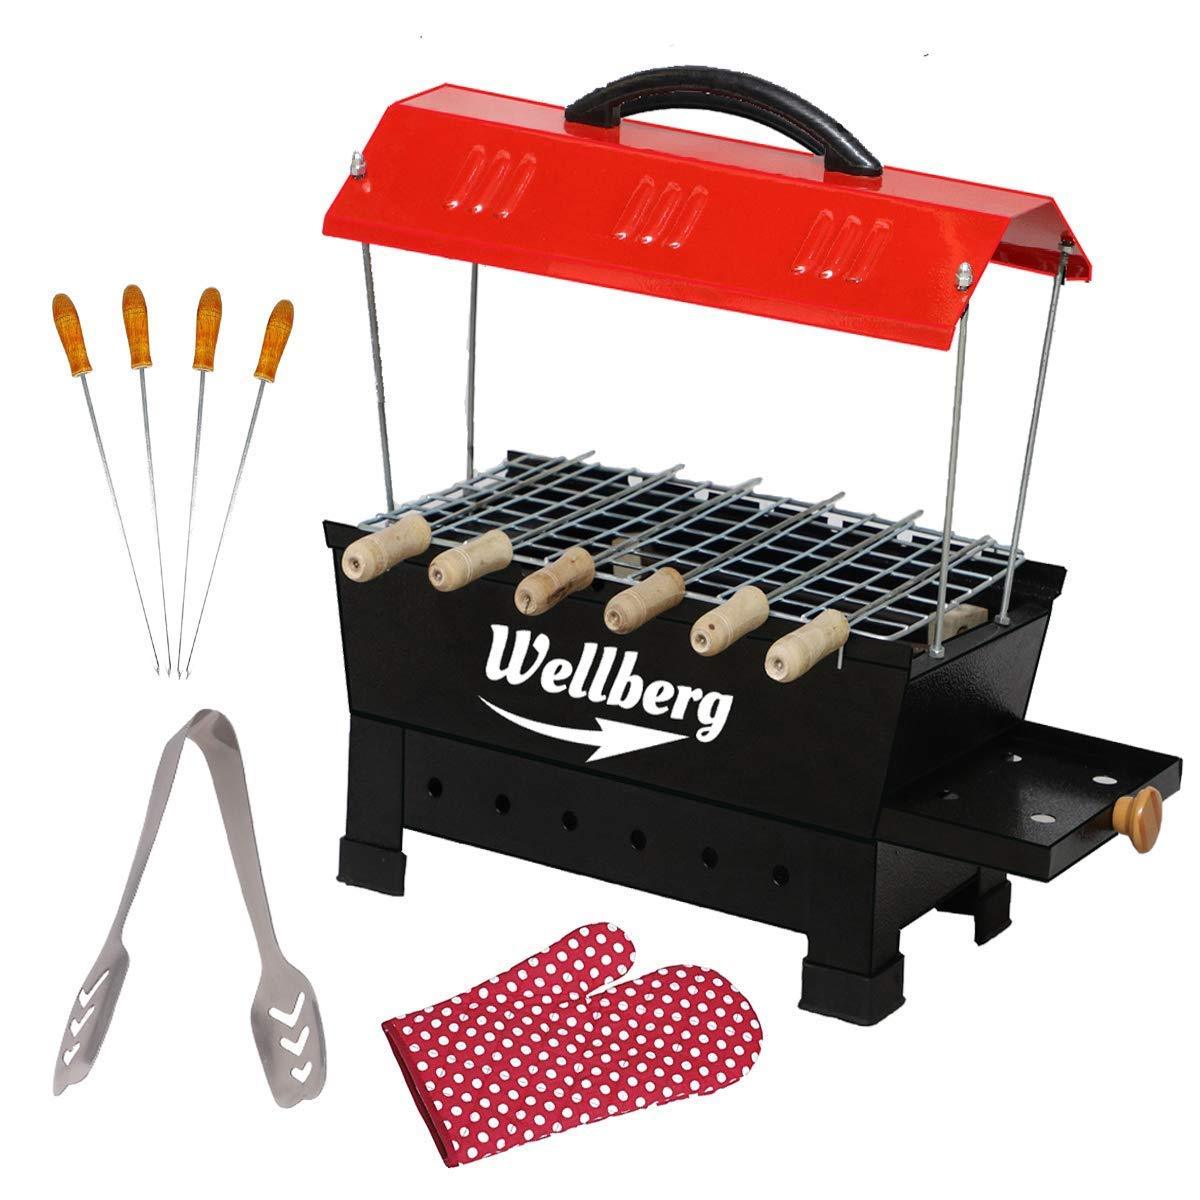 Wellberg Electric & Charcoal BBQ Grill | Tandoor Portable charcoal Barbecue | Stainless Steel Grill | - WELLBERG